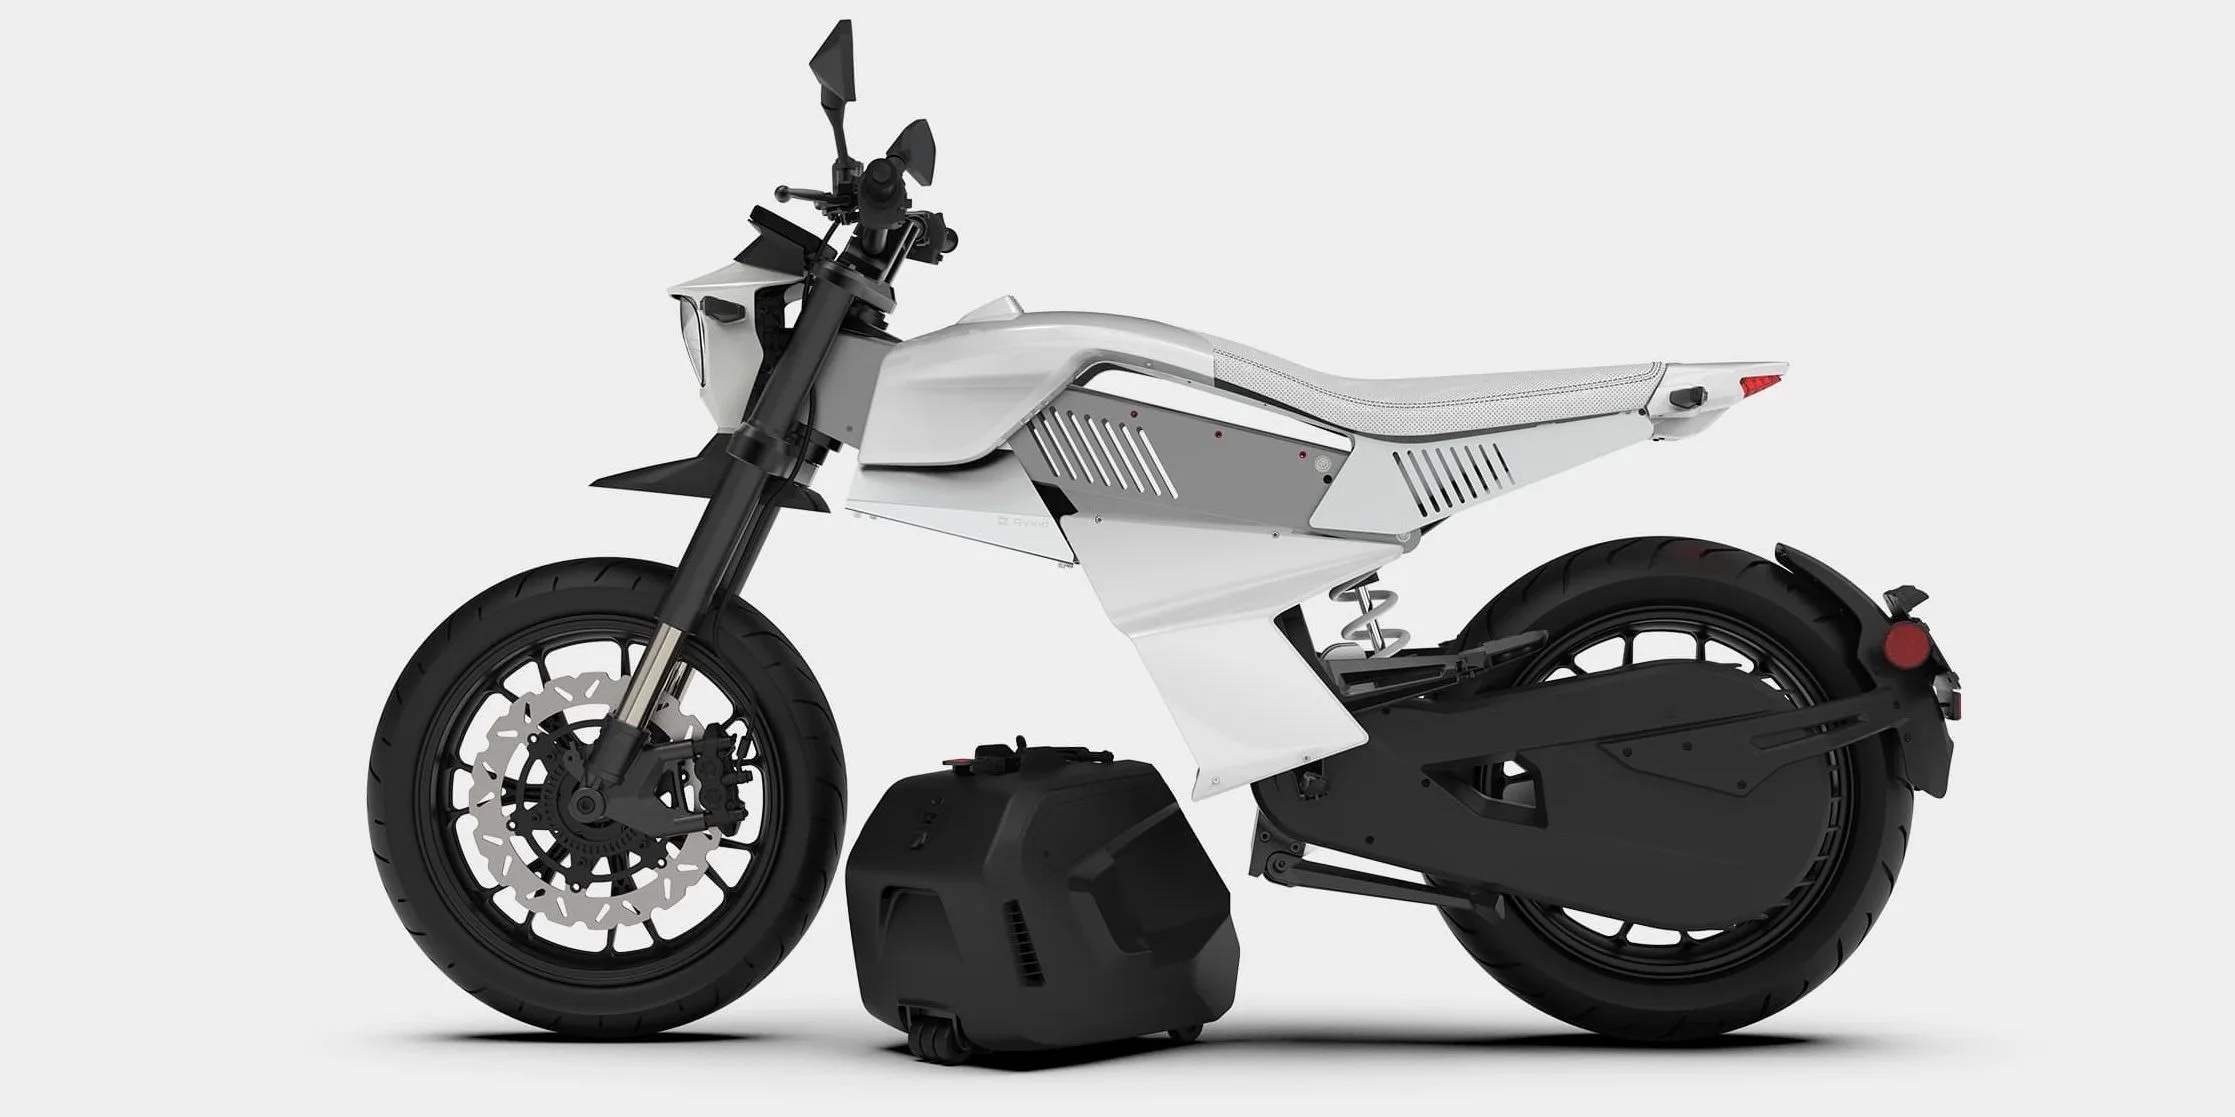 The Ryvid Anthem- a new, ultra-lightweight electric motorcycle featuring a host of perks for the bargain-friendly price of $7,800 USD. Media sourced from Electrek.